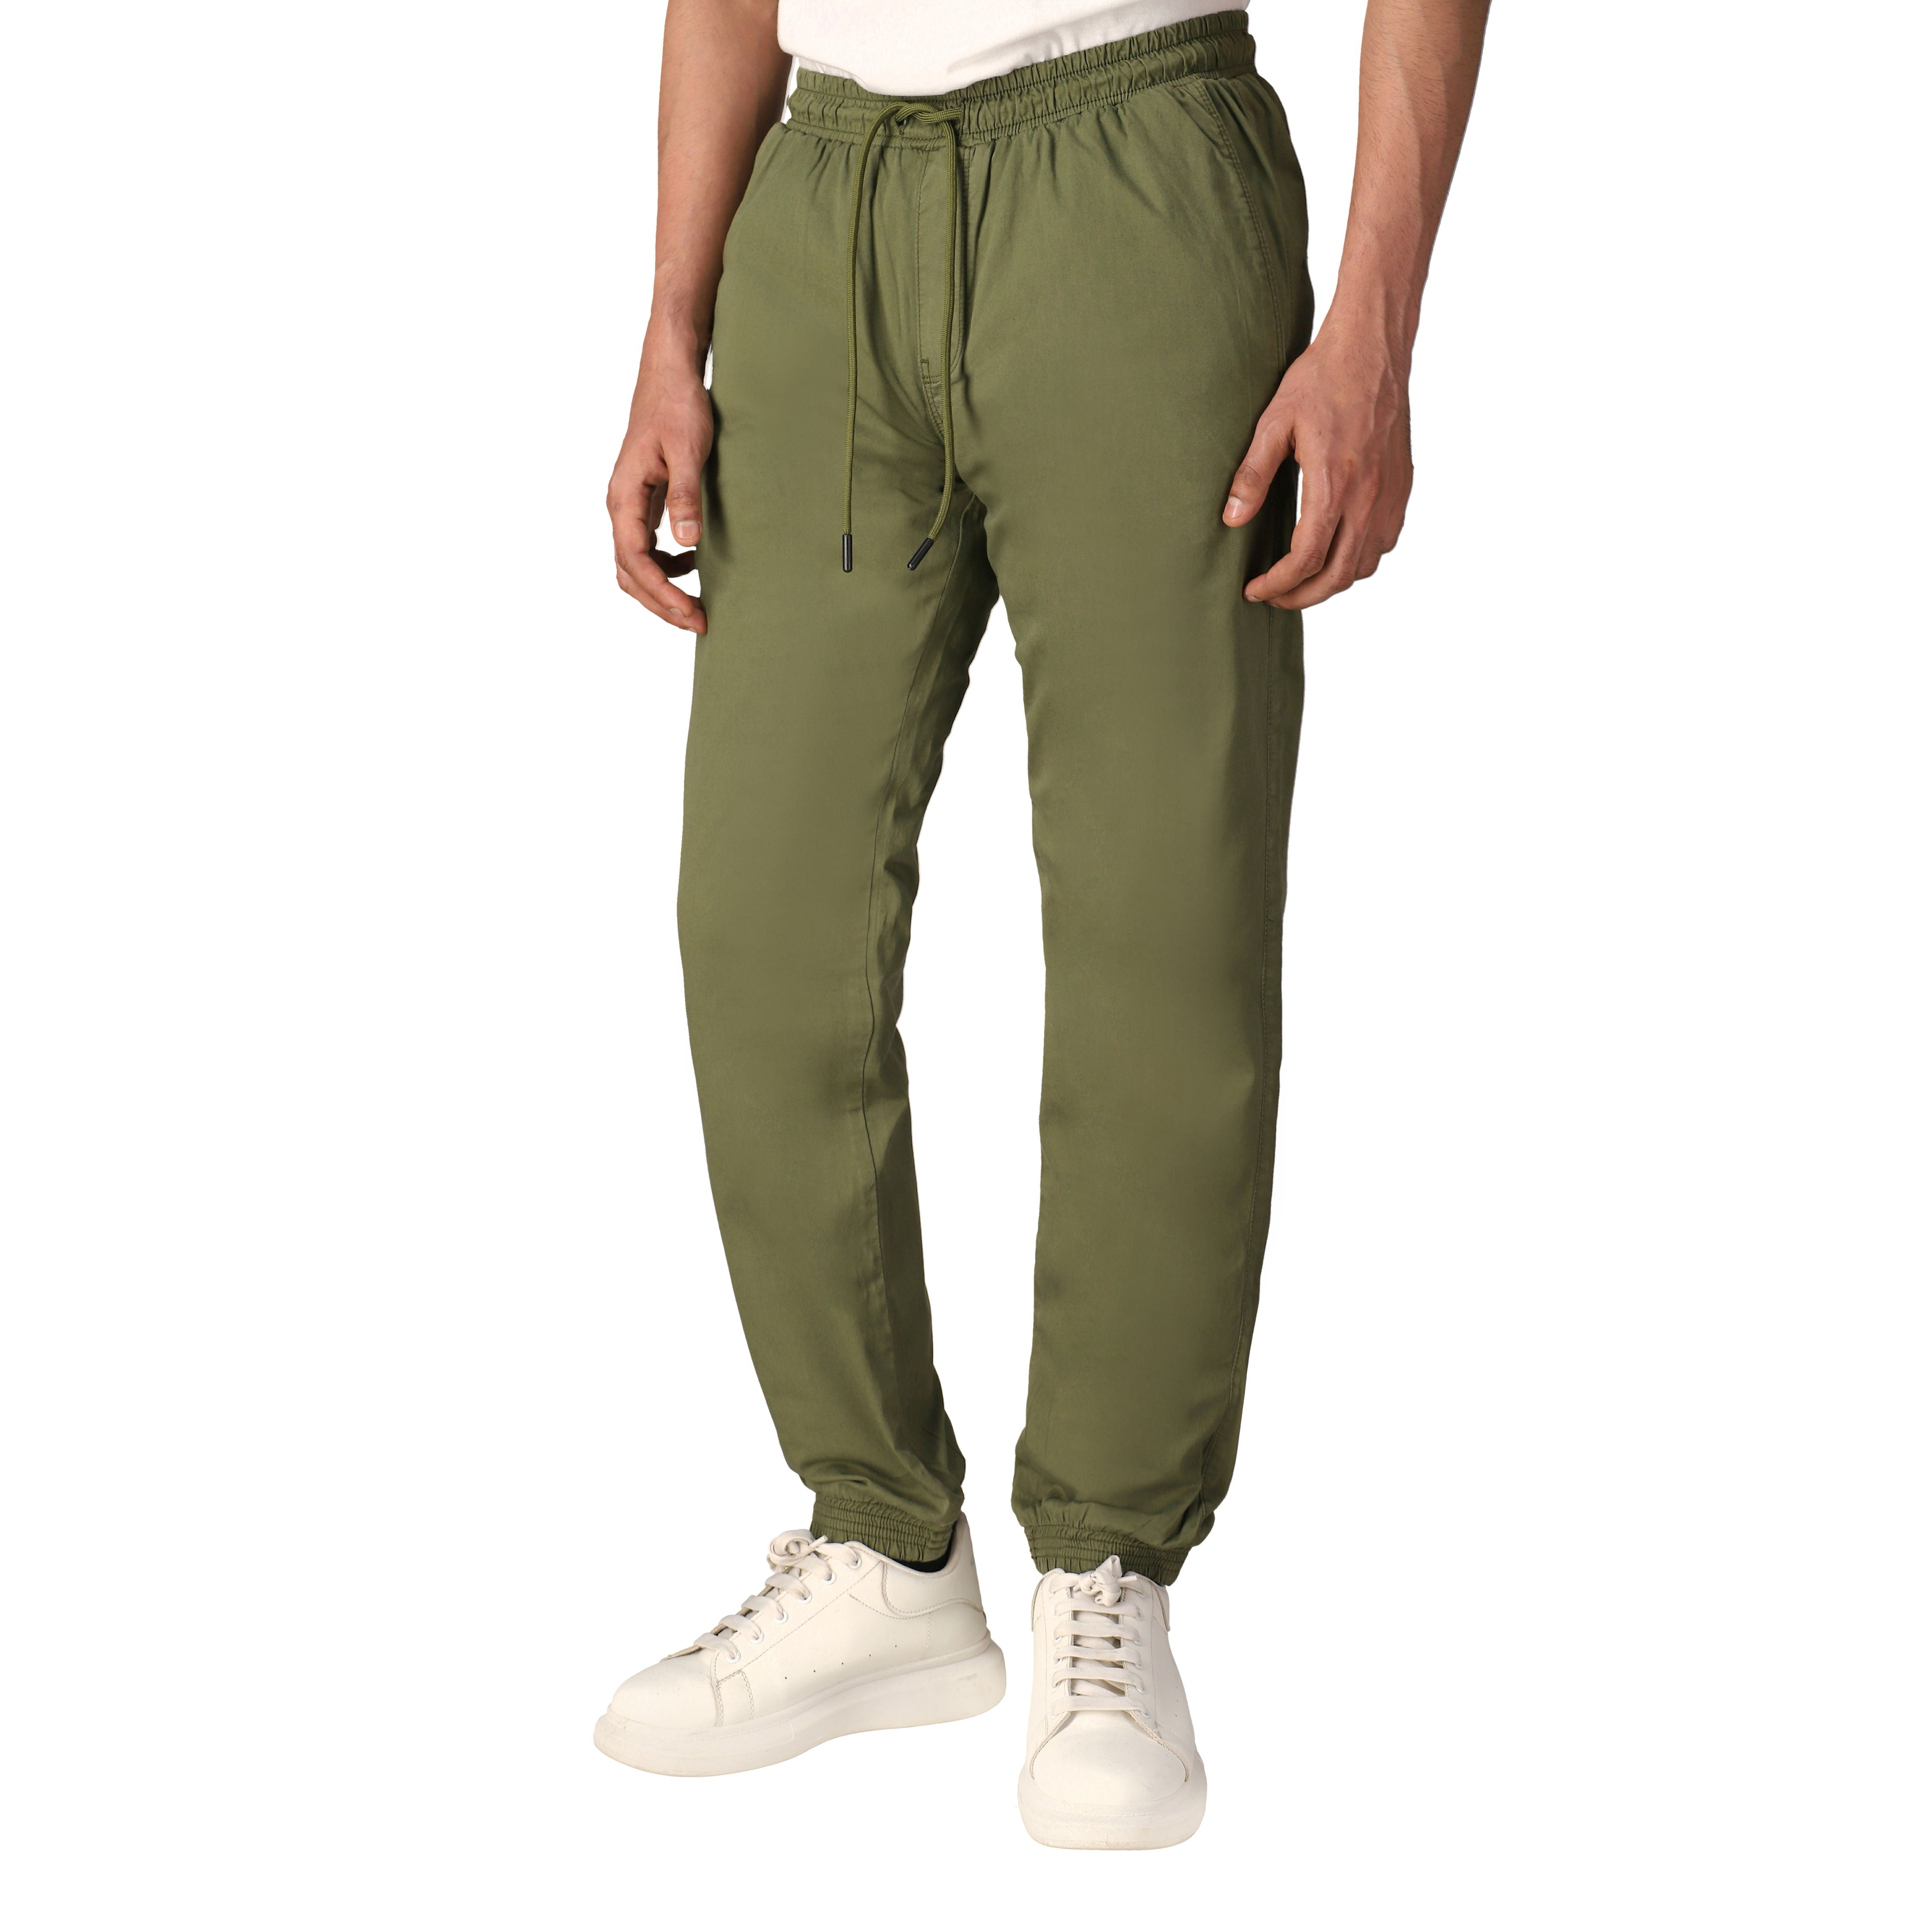 Cotton Twill Jogger Pants with Pockets and Drawstring Waist